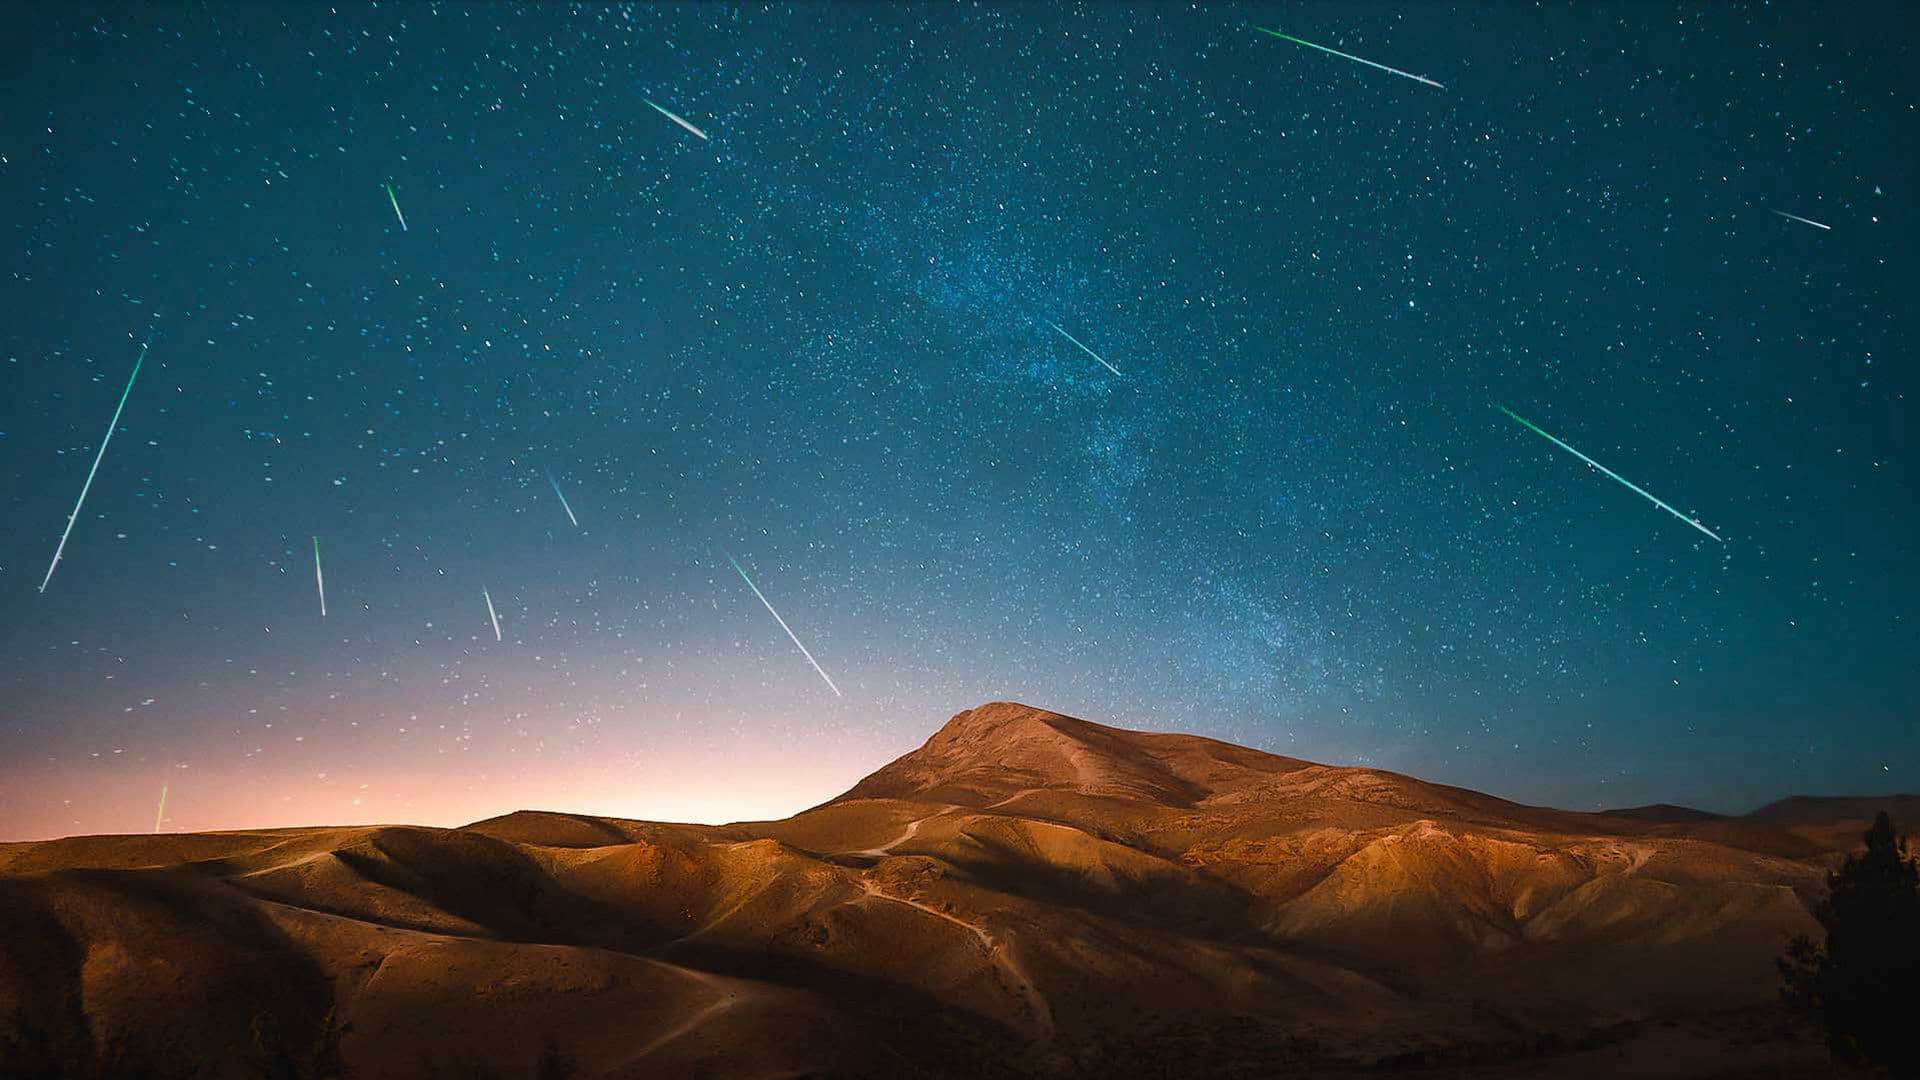 Four Meteor Showers Visible Together This Summer